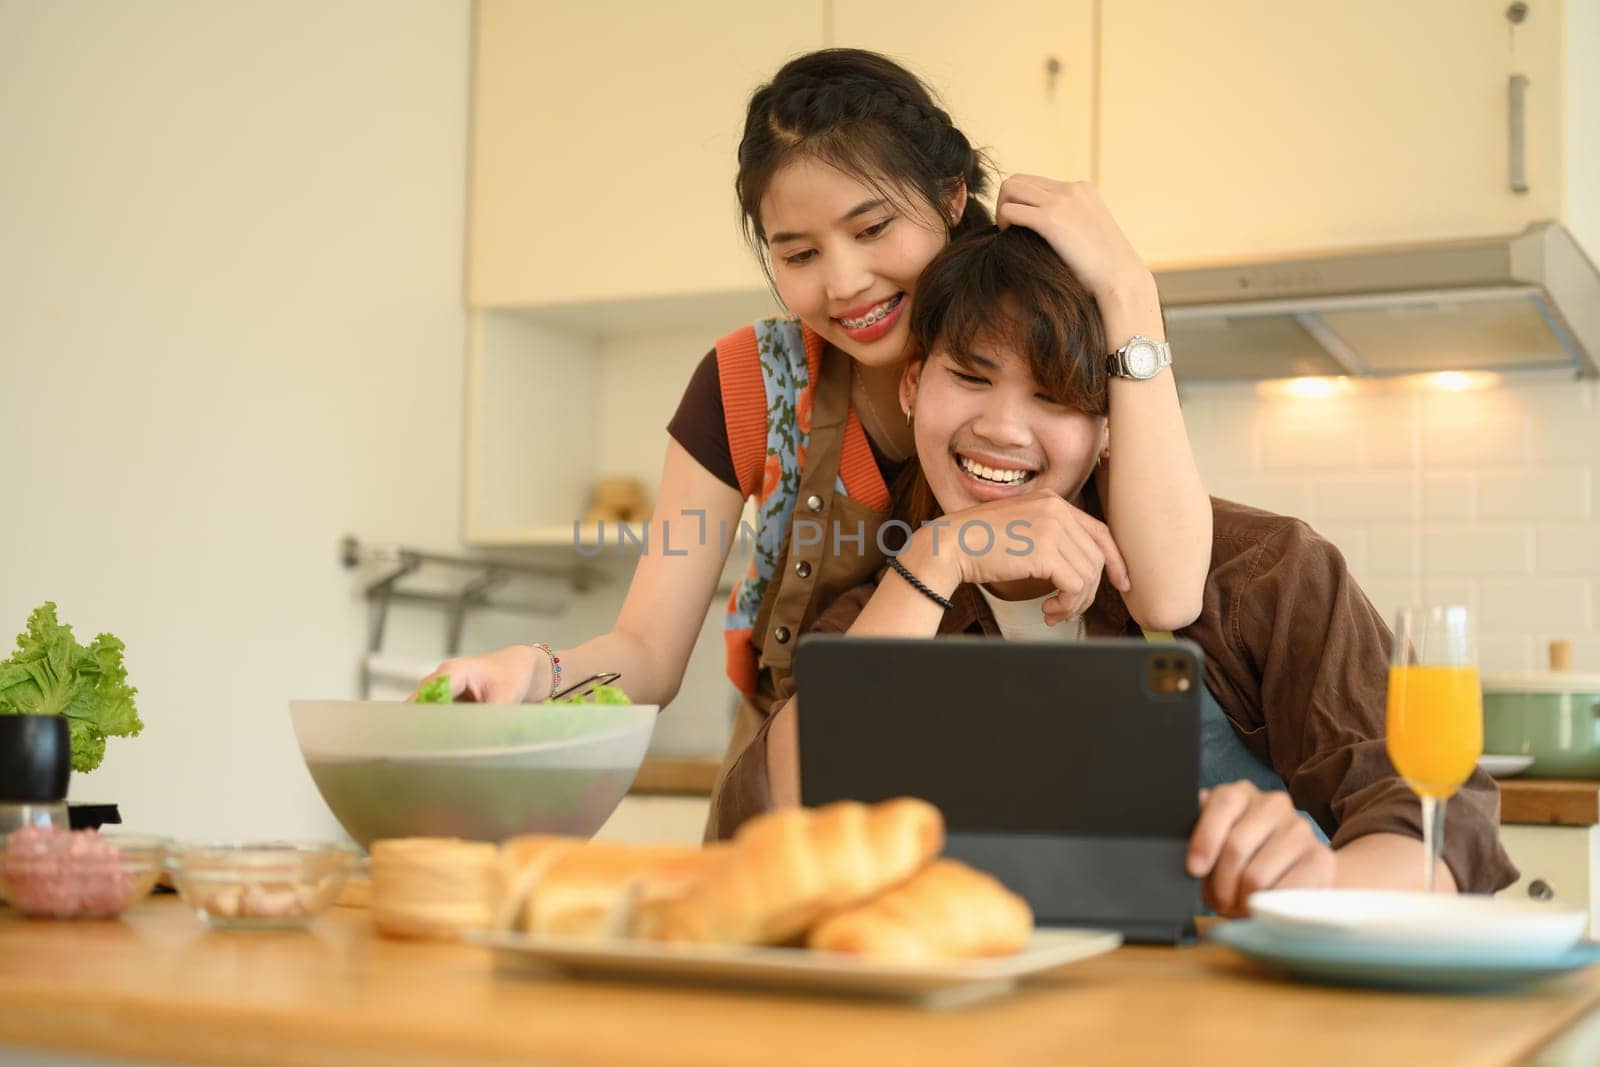 Young sweet couple reading recipe online on website while cooking healthy meal in kitchen by prathanchorruangsak